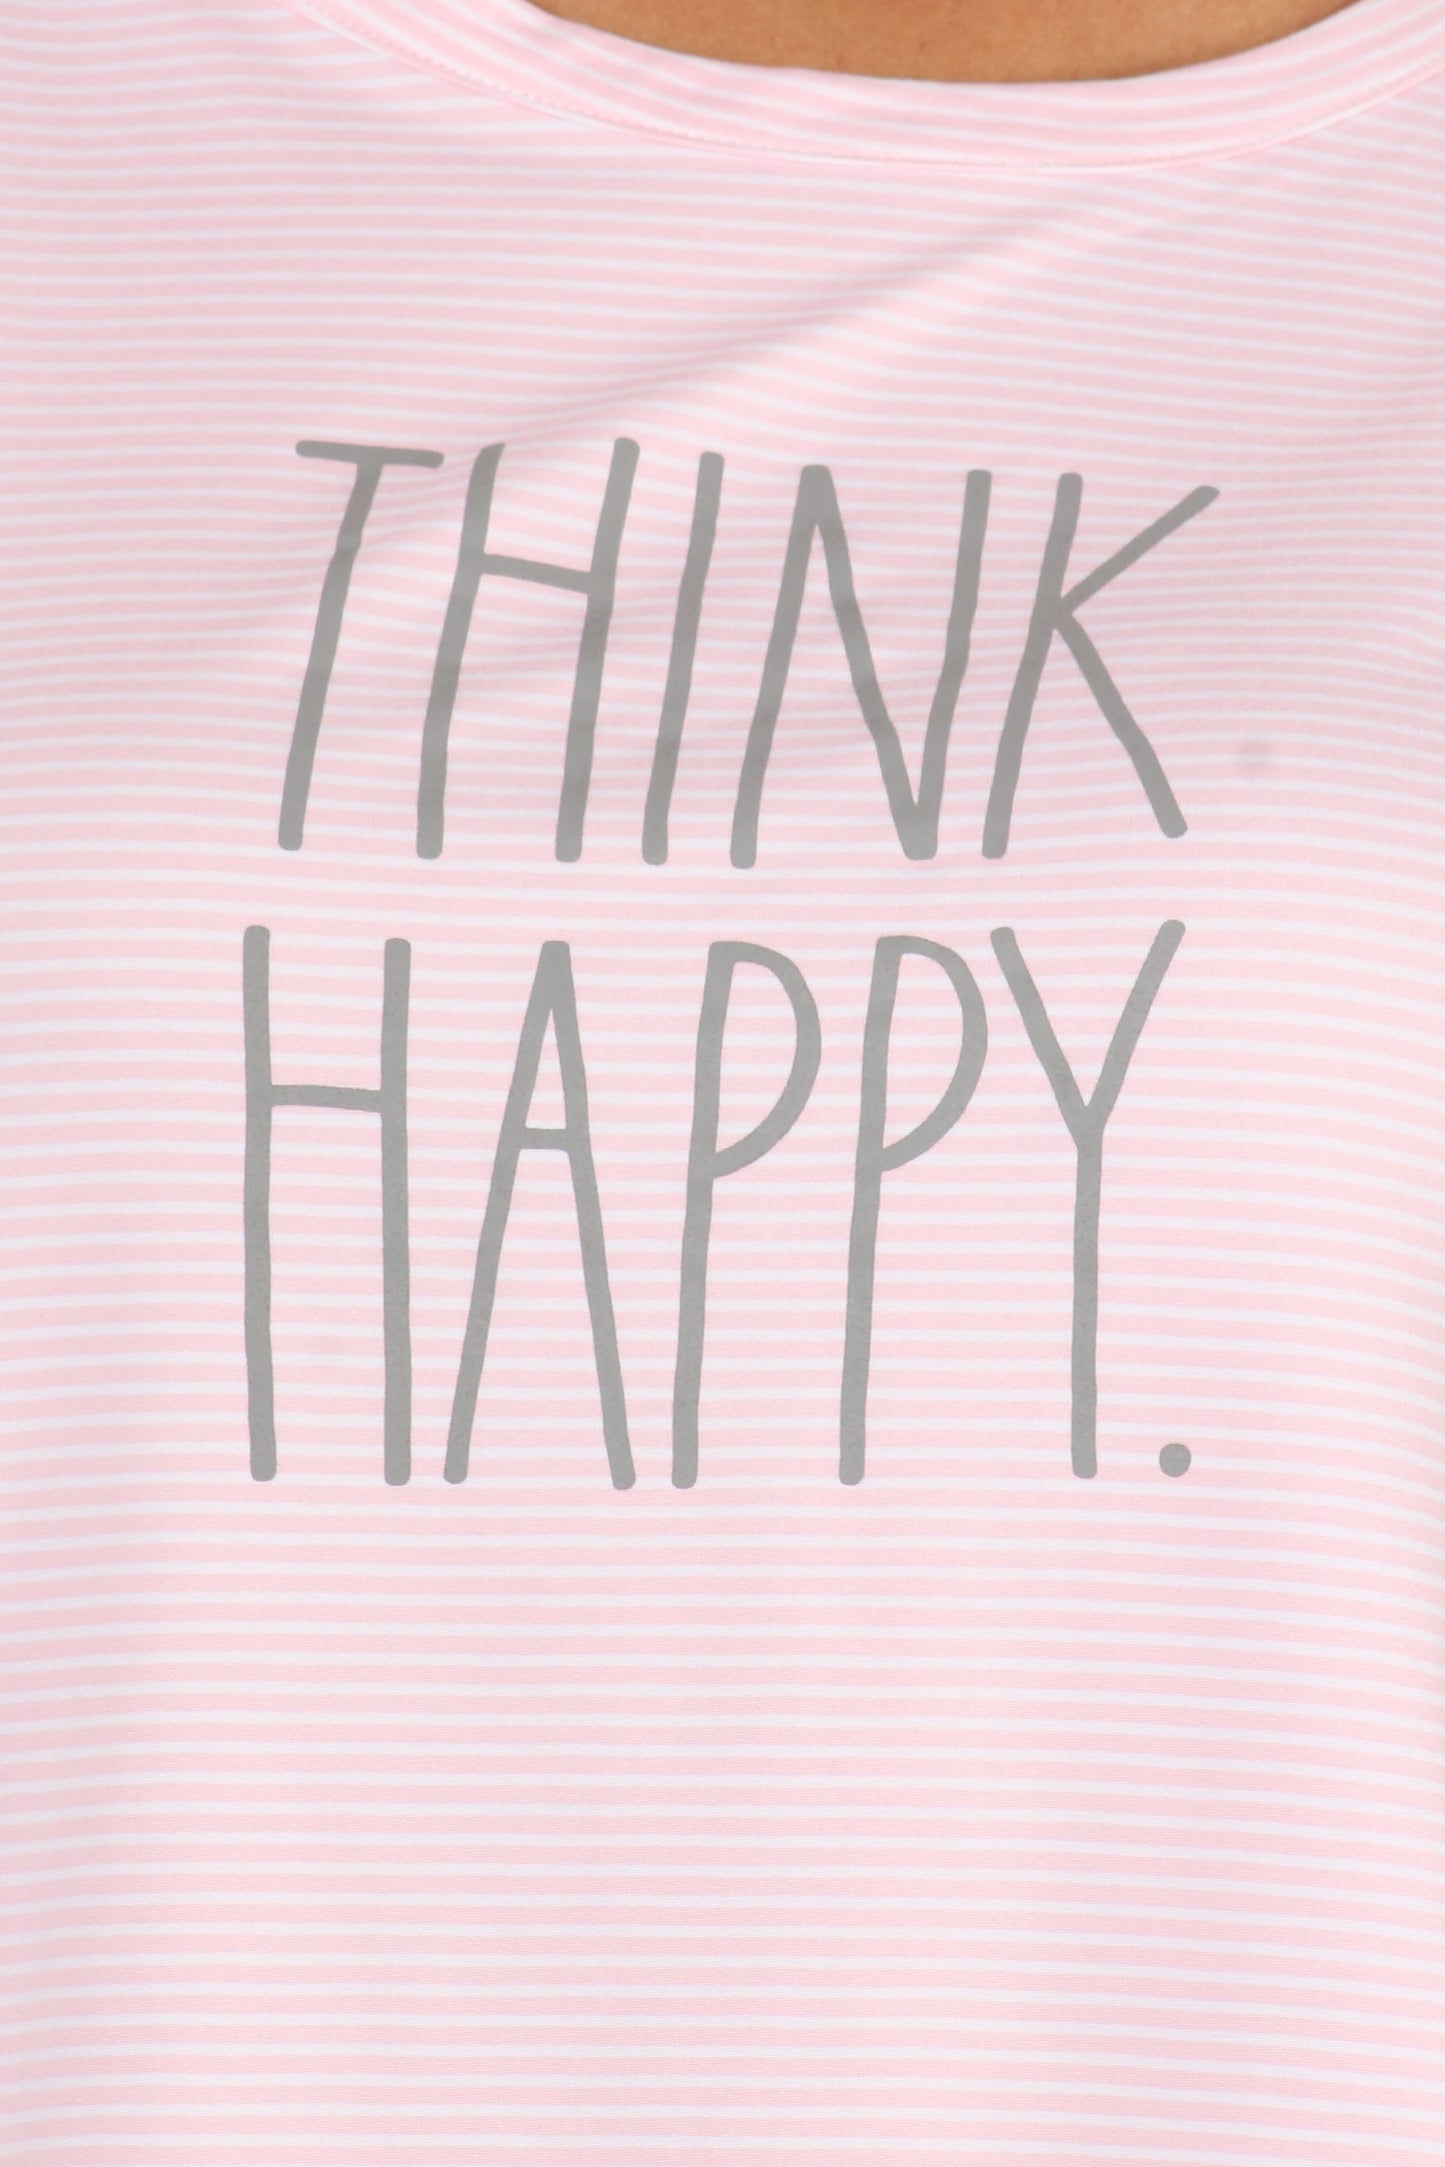 Women's "THINK HAPPY" Long Sleeve Top and Jogger Pajama Set - Rae Dunn Wear